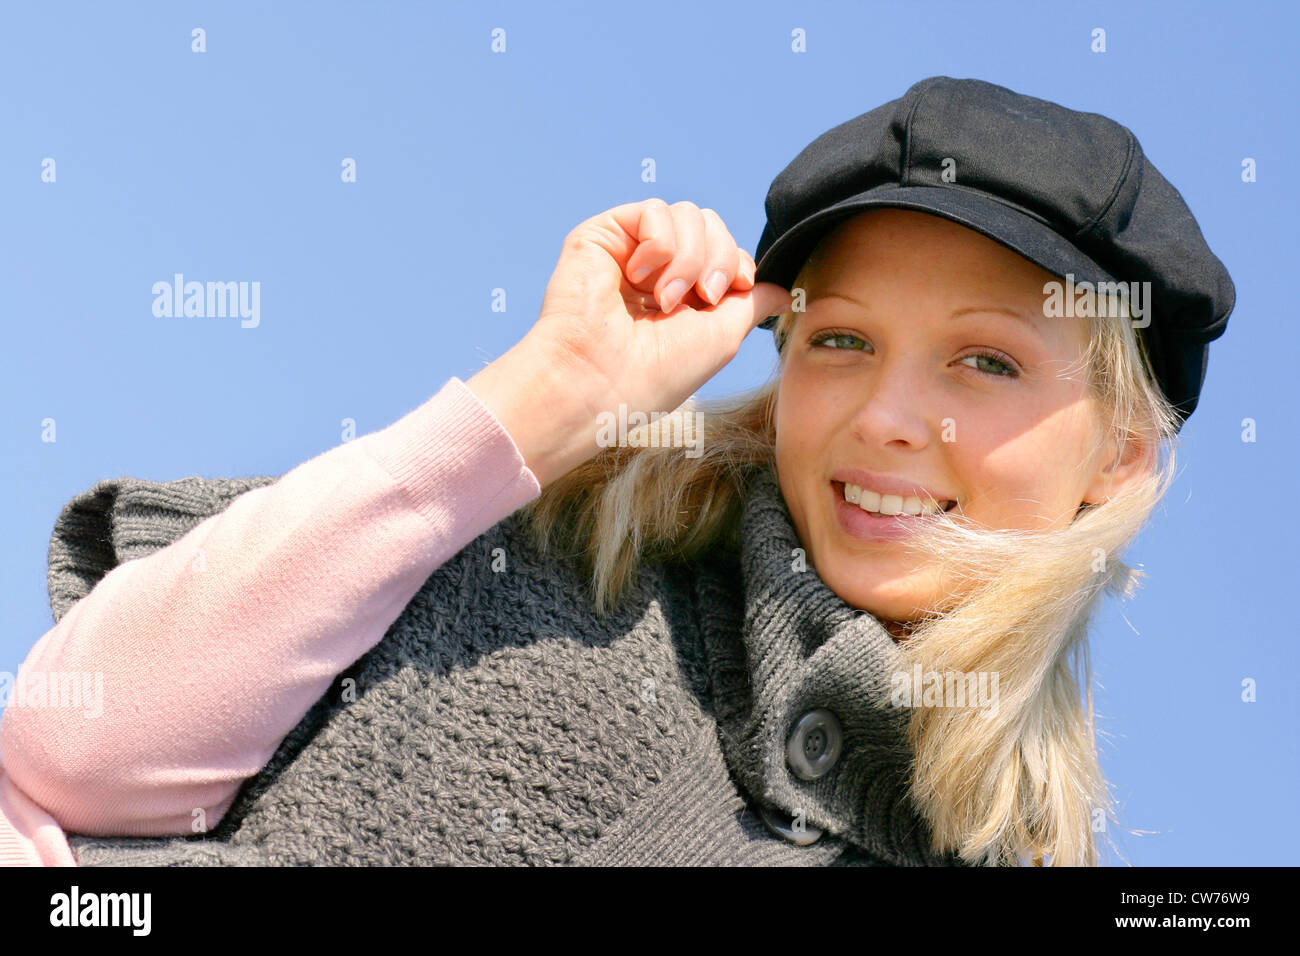 young blond smiling girl, with one hand at her cap Stock Photo